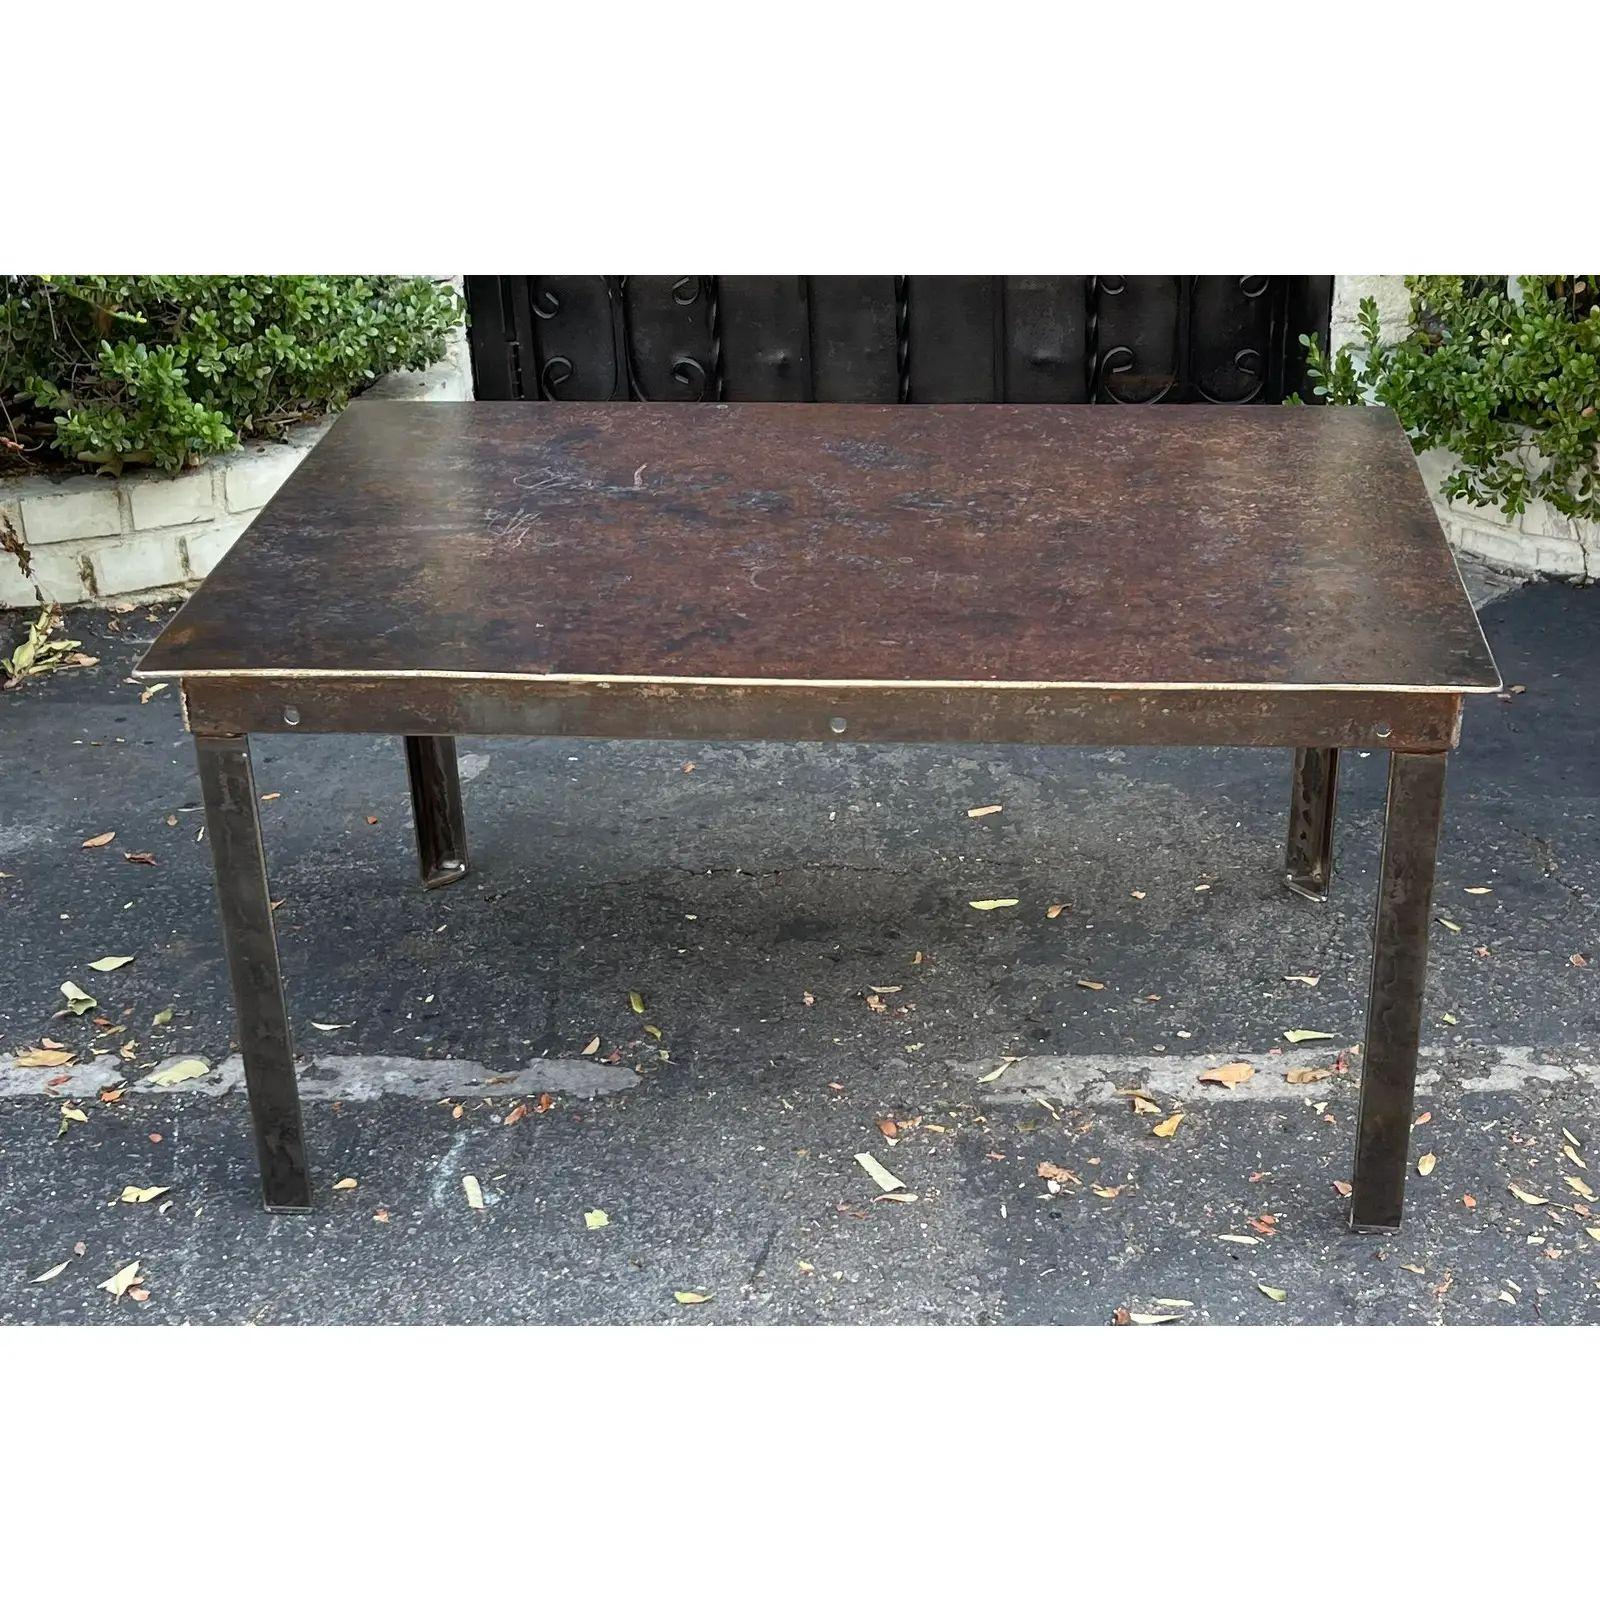 Modern Pounded Iron Industrial Chic Coffee Cocktail Table (Industriell) im Angebot